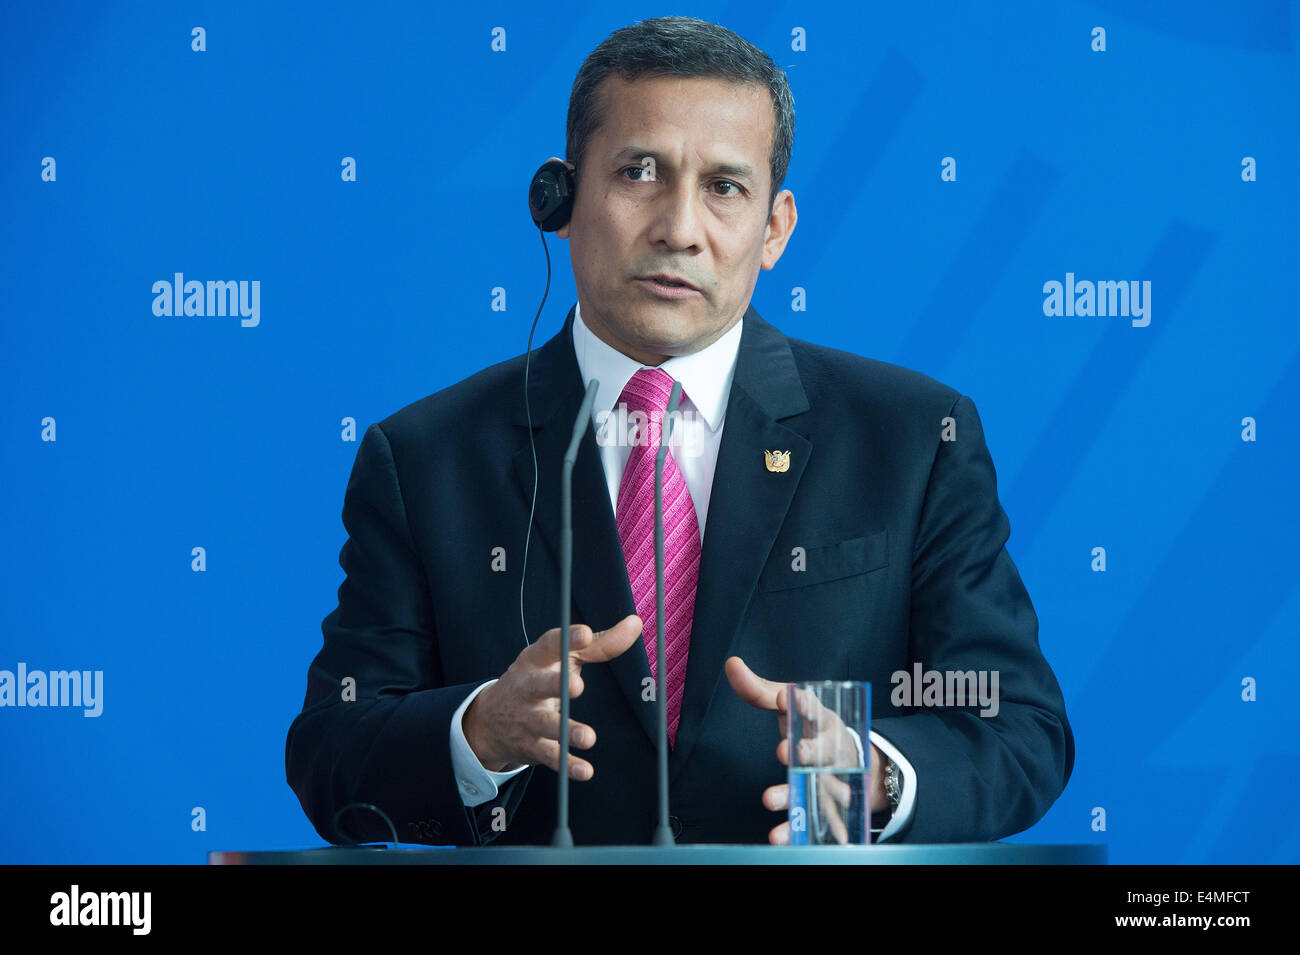 Berlin, Germany. 14th July, 2014. Peruvian President Ollanta Humala Tasso attends a press conference at the German chancellery in Berlin, Germany, 14 July 2014. Tasso is on a state visit in Germany. Photo: Maurizio Gambarini/dpa/Alamy Live News Stock Photo